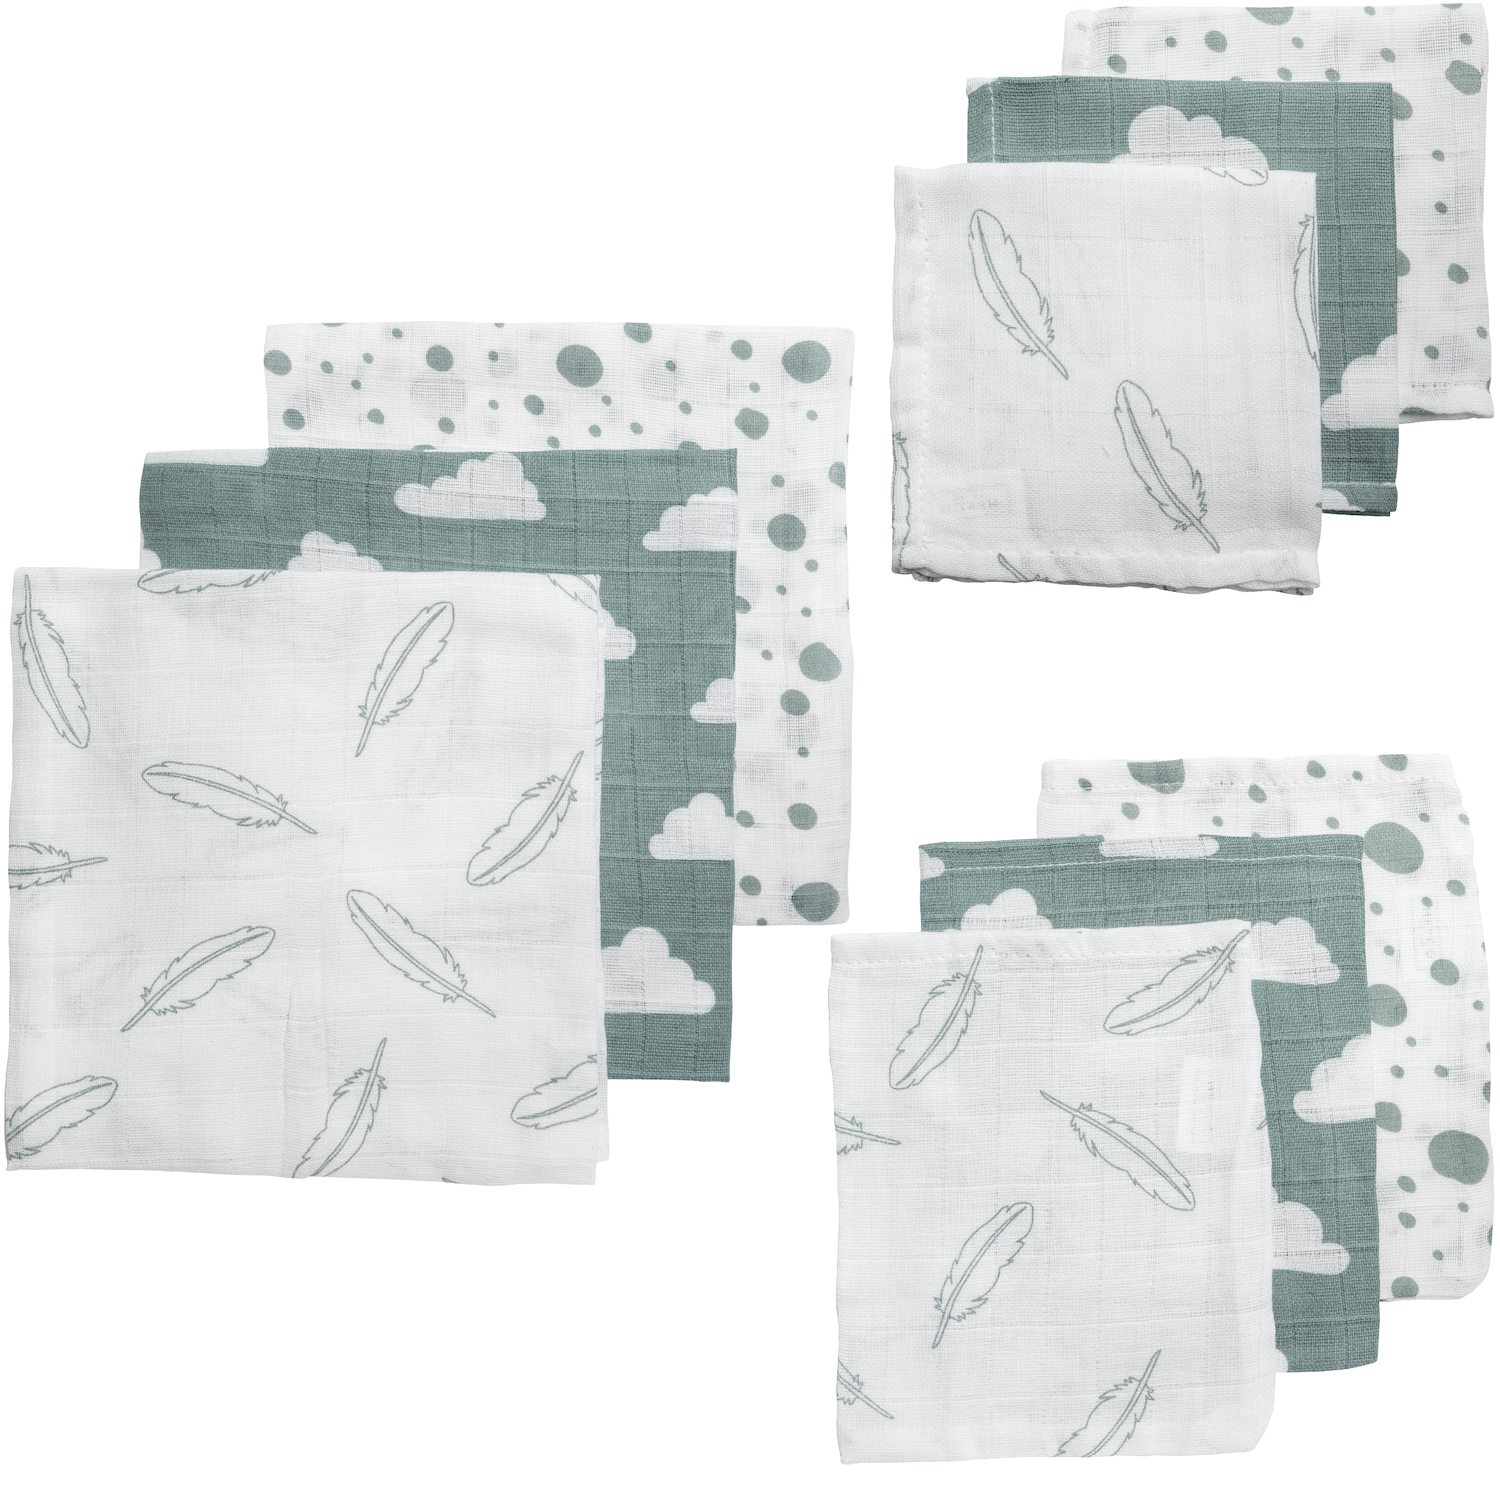 Starterset 9-pack hydrofiel Clouds/Dots/Feathers - stone green